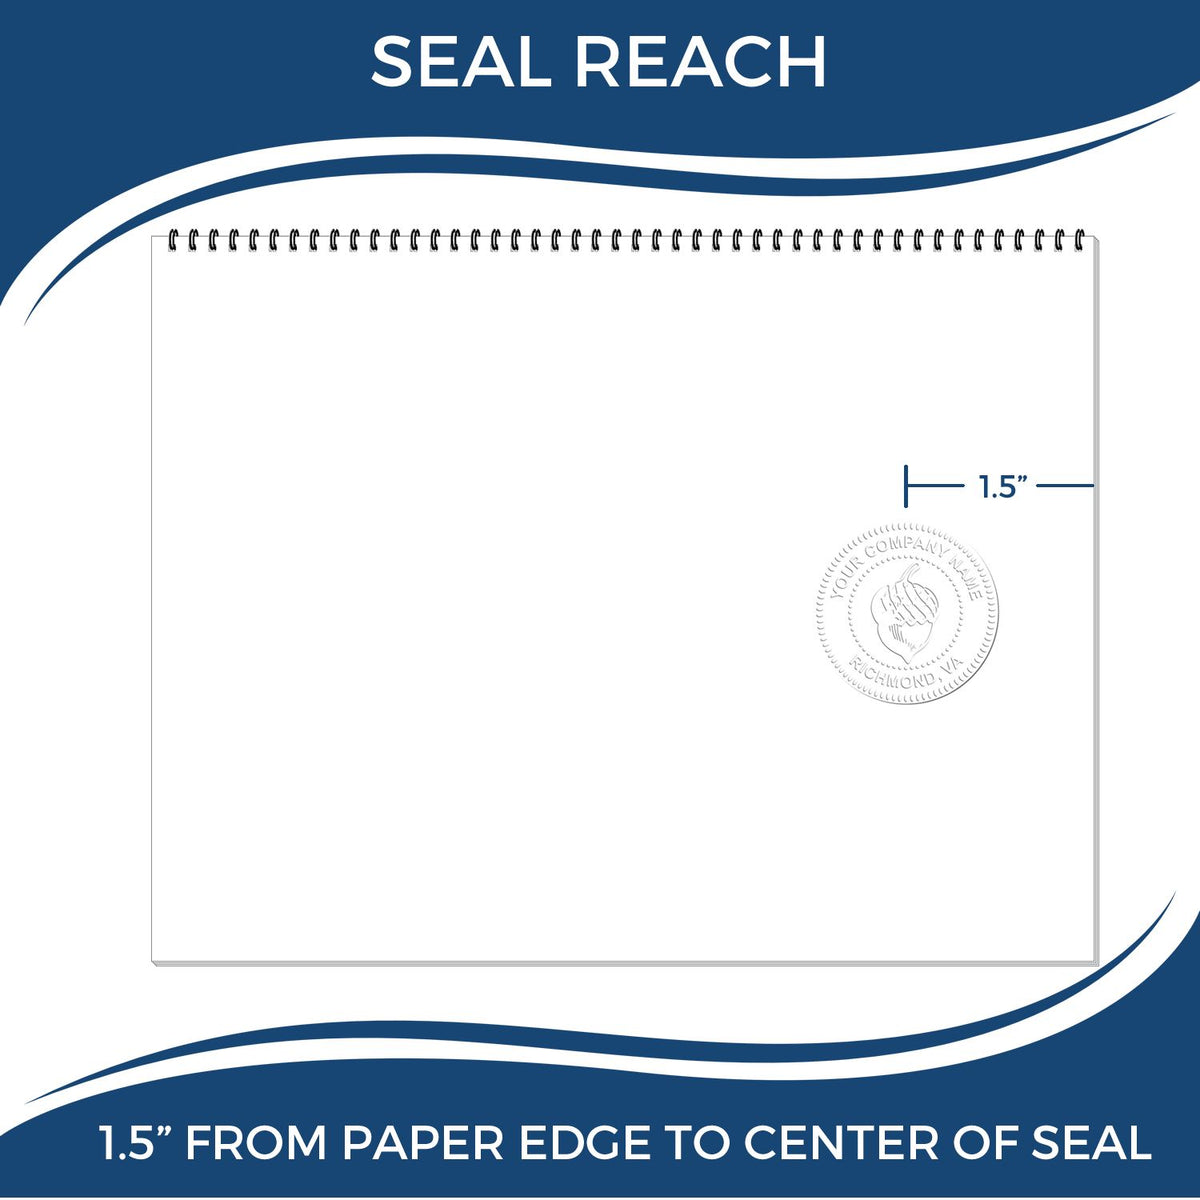 An infographic showing the seal reach which is represented by a ruler and a miniature seal image of the Gift Connecticut Landscape Architect Seal